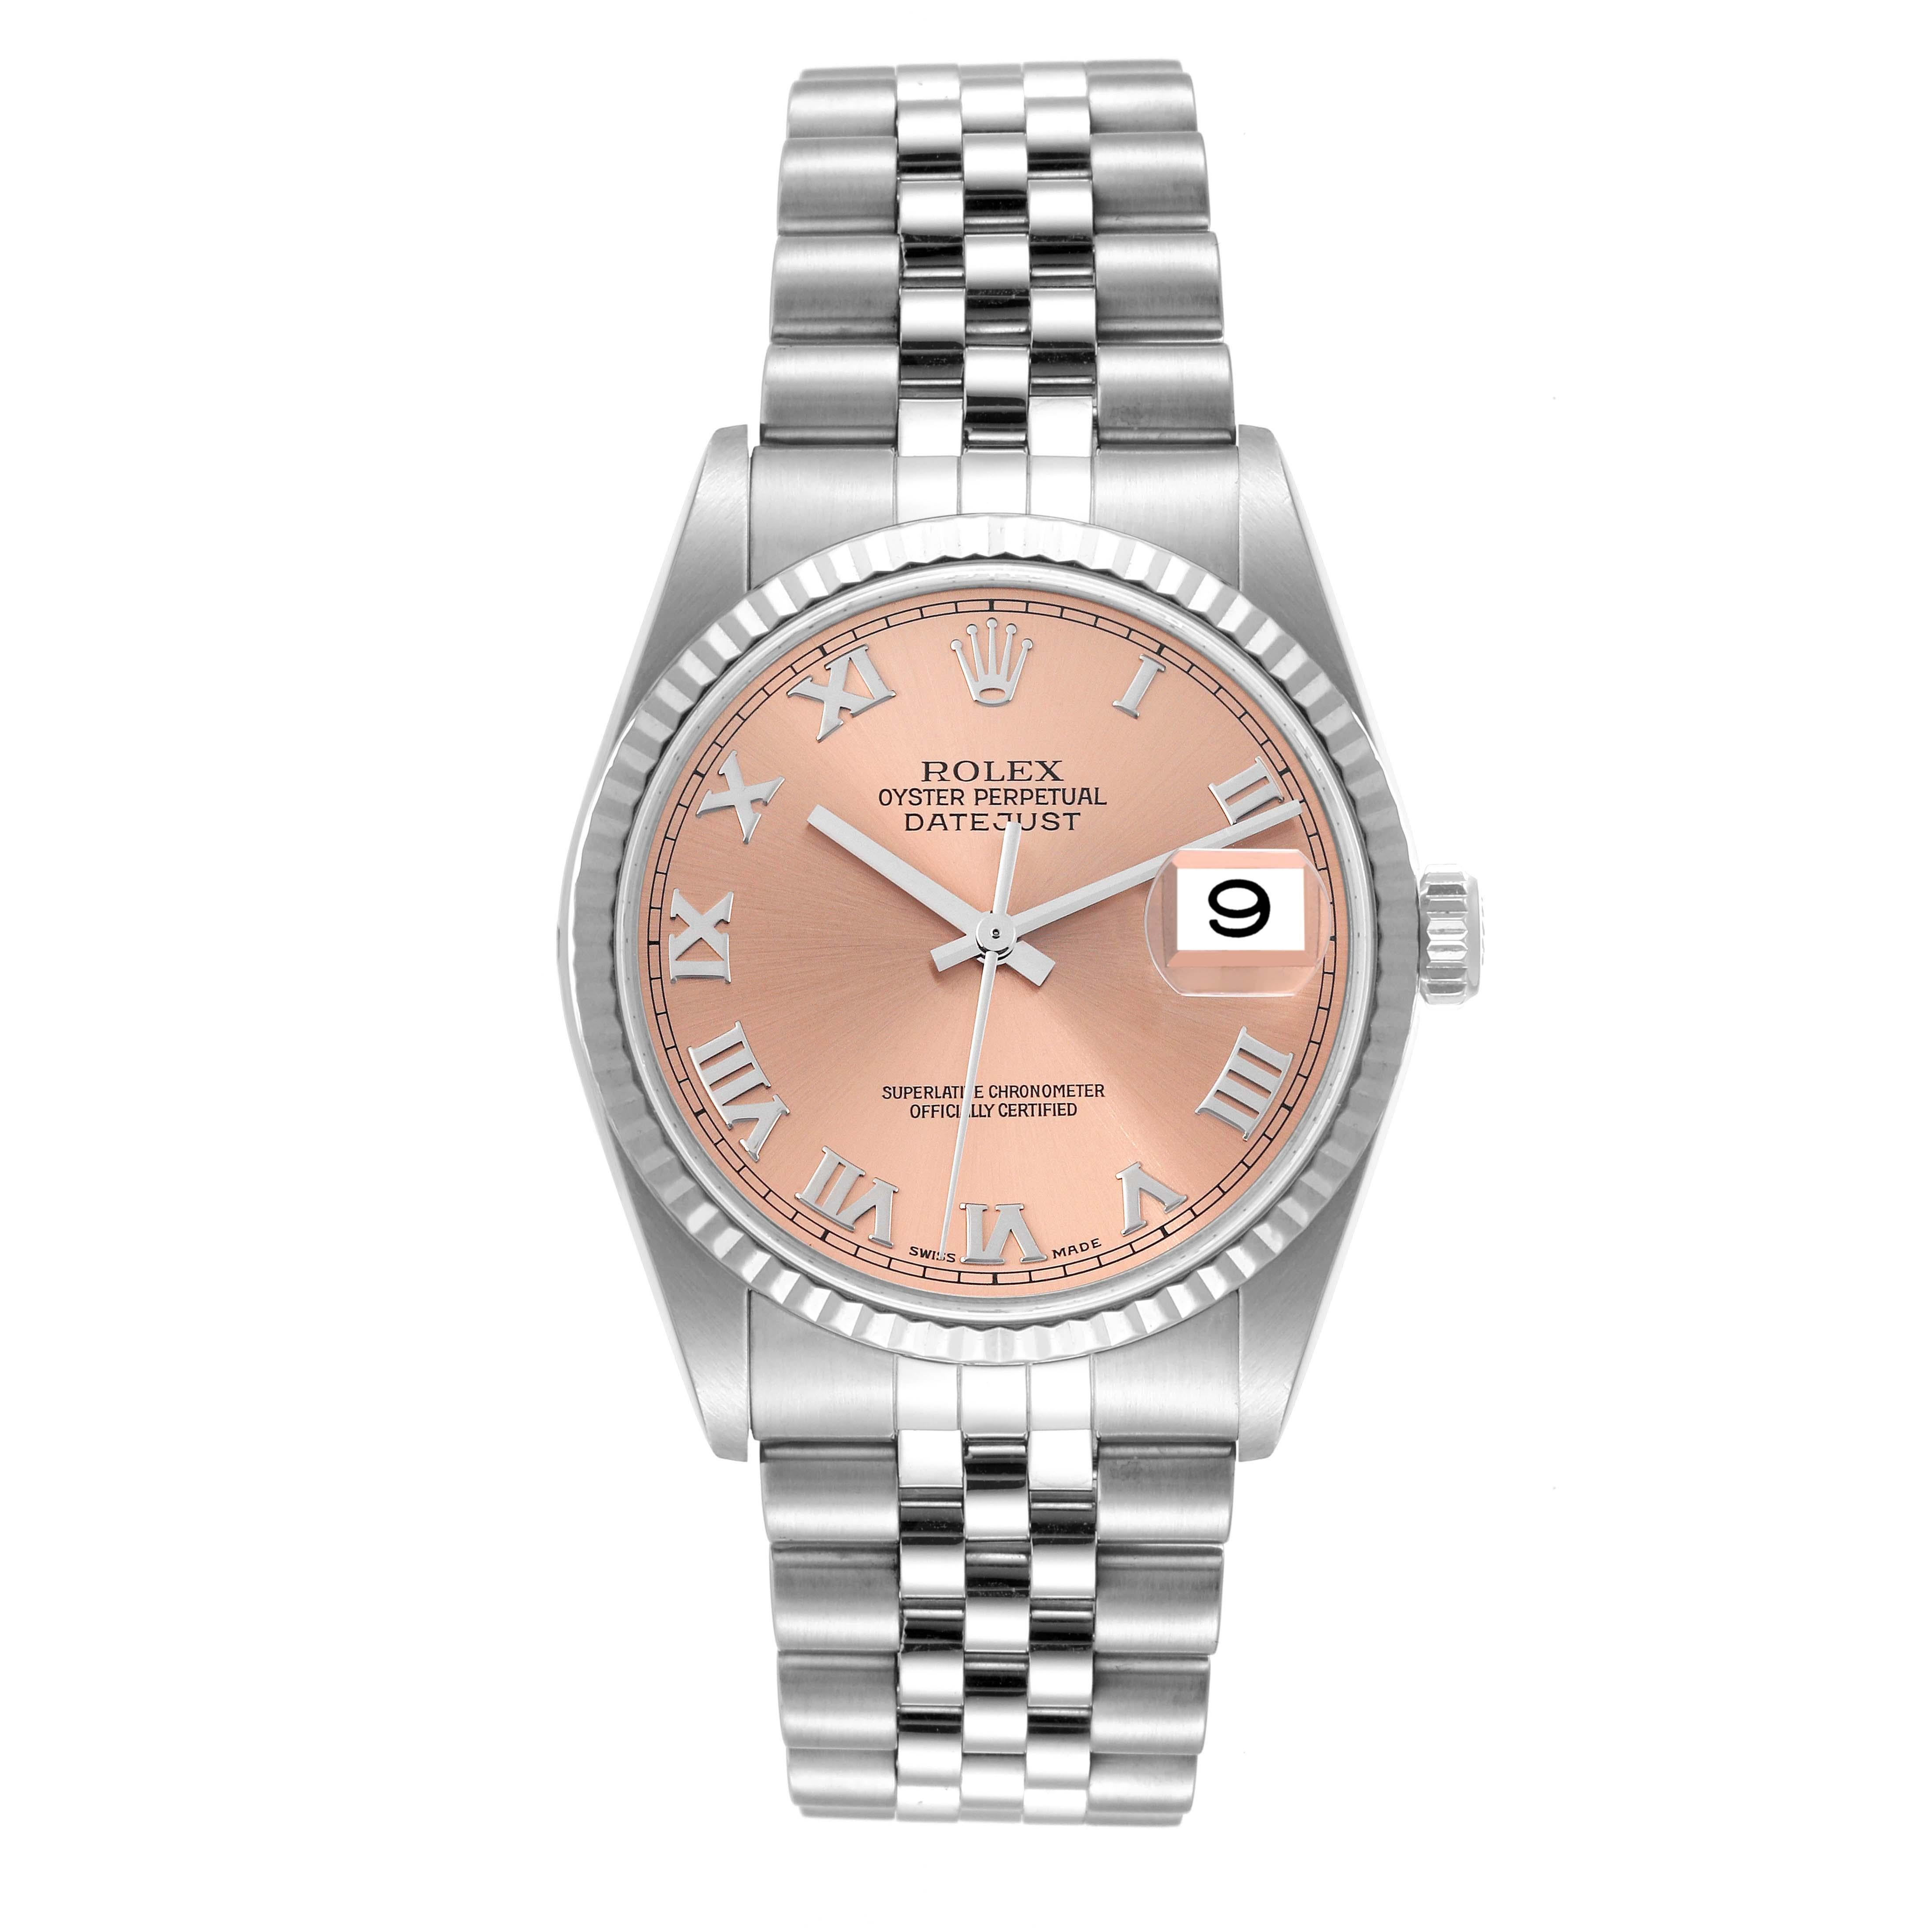 Rolex Datejust 36 Steel White Gold Salmon Roman Dial Mens Watch 16234. Officially certified chronometer automatic self-winding movement. Stainless steel oyster case 36 mm in diameter. Rolex logo on the crown. 18k white gold fluted bezel. Scratch